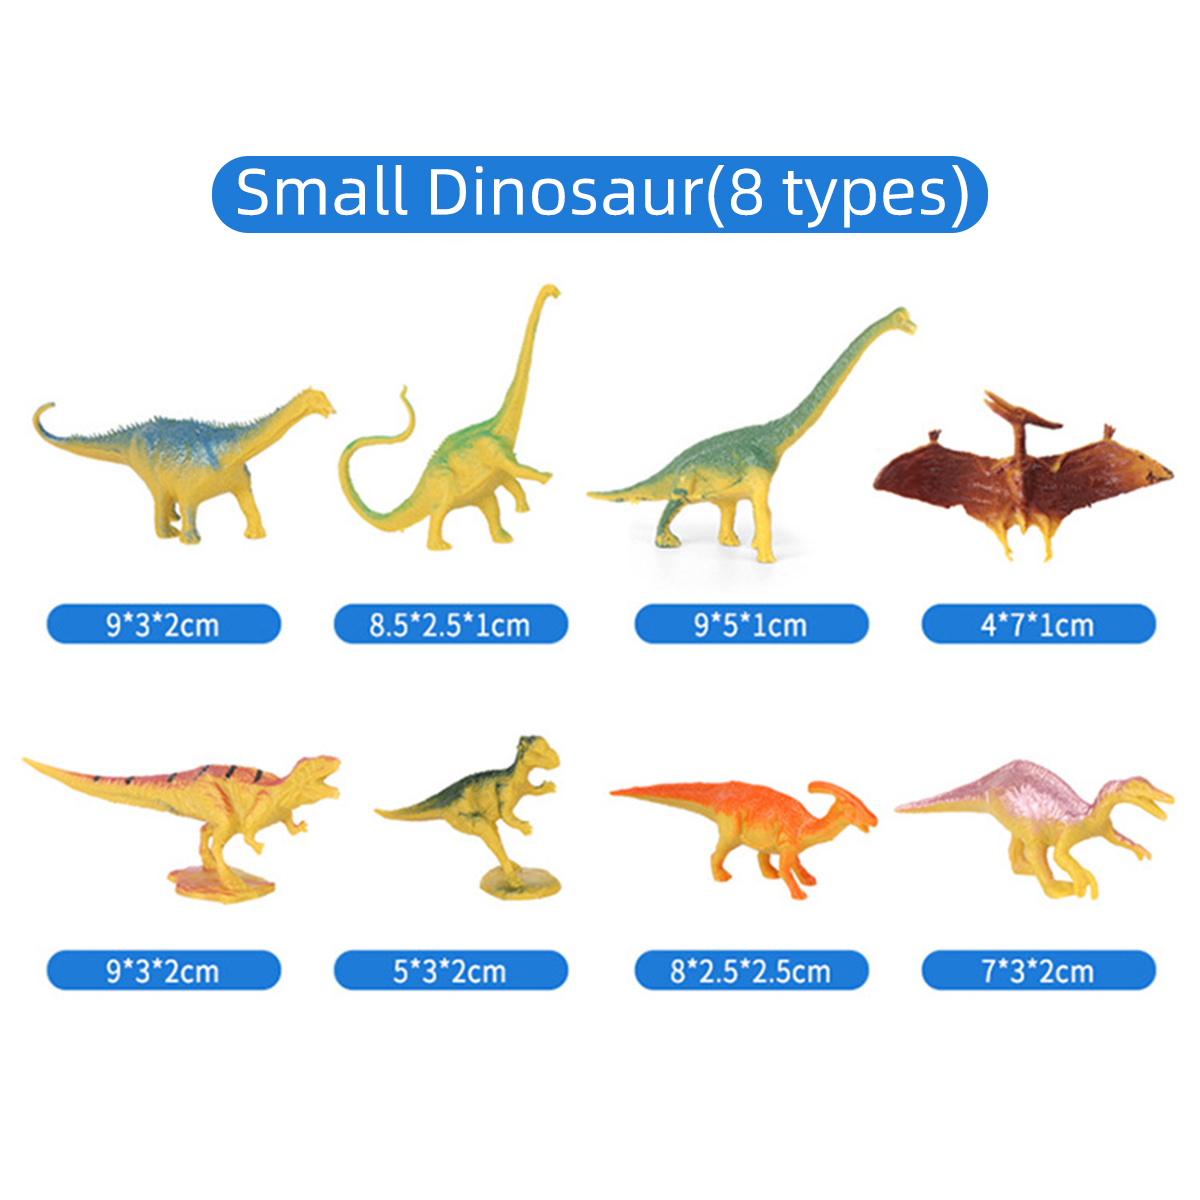 2833346365Pcs-Multi-style-Diecast-Dinosaurs-Model-Play-Set-Educational-Toy-with-Play-Mat-for-Kids-Ch-1836203-13